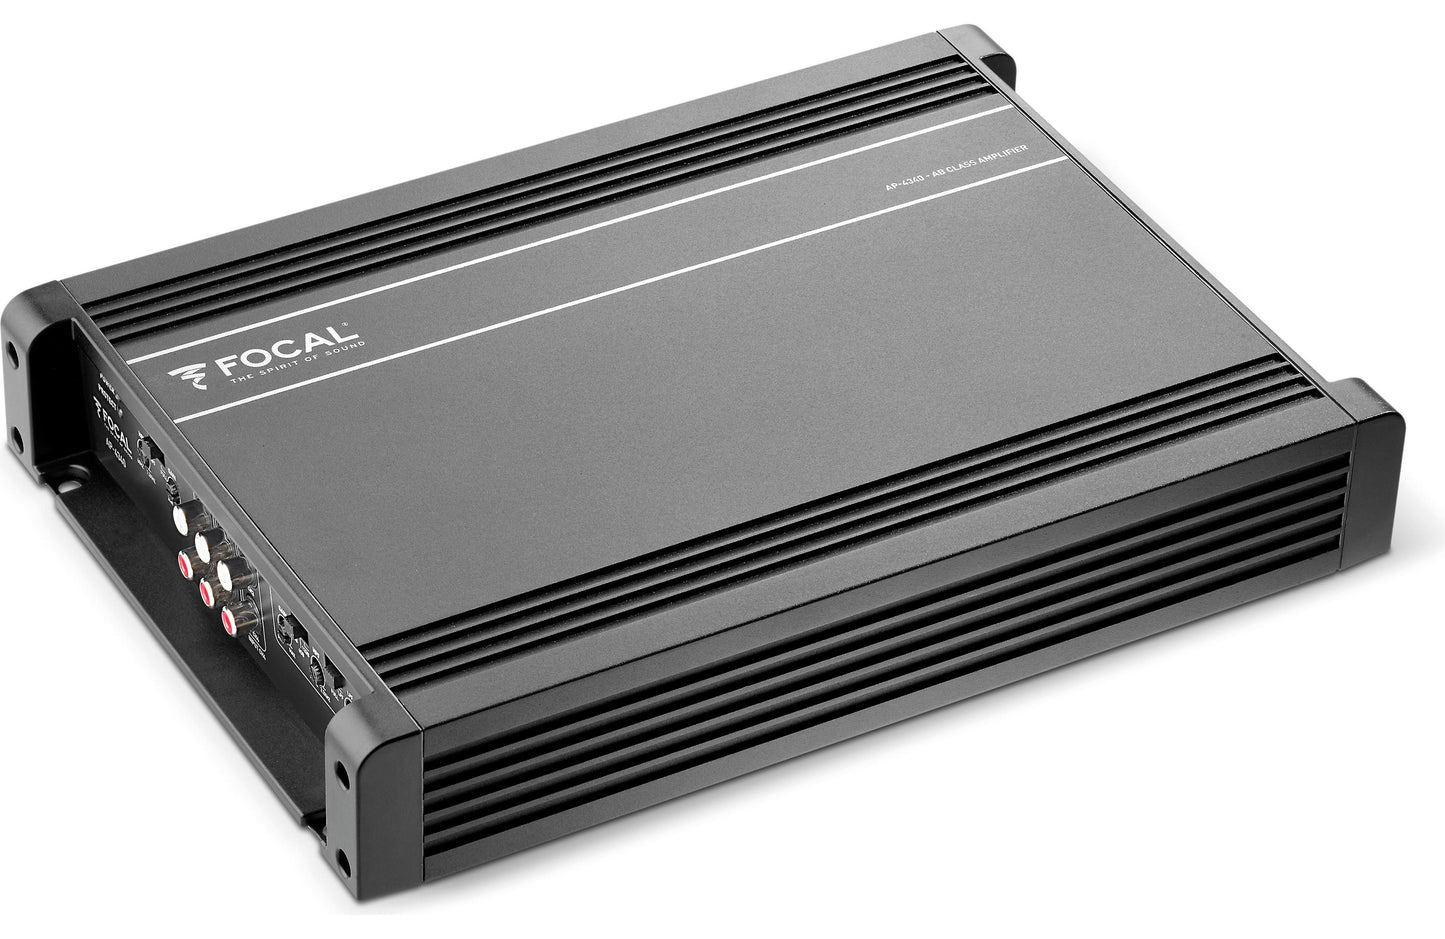 Focal AP 4340 Auditor Series 4-channel car amplifier — 70 watts RMS x 4